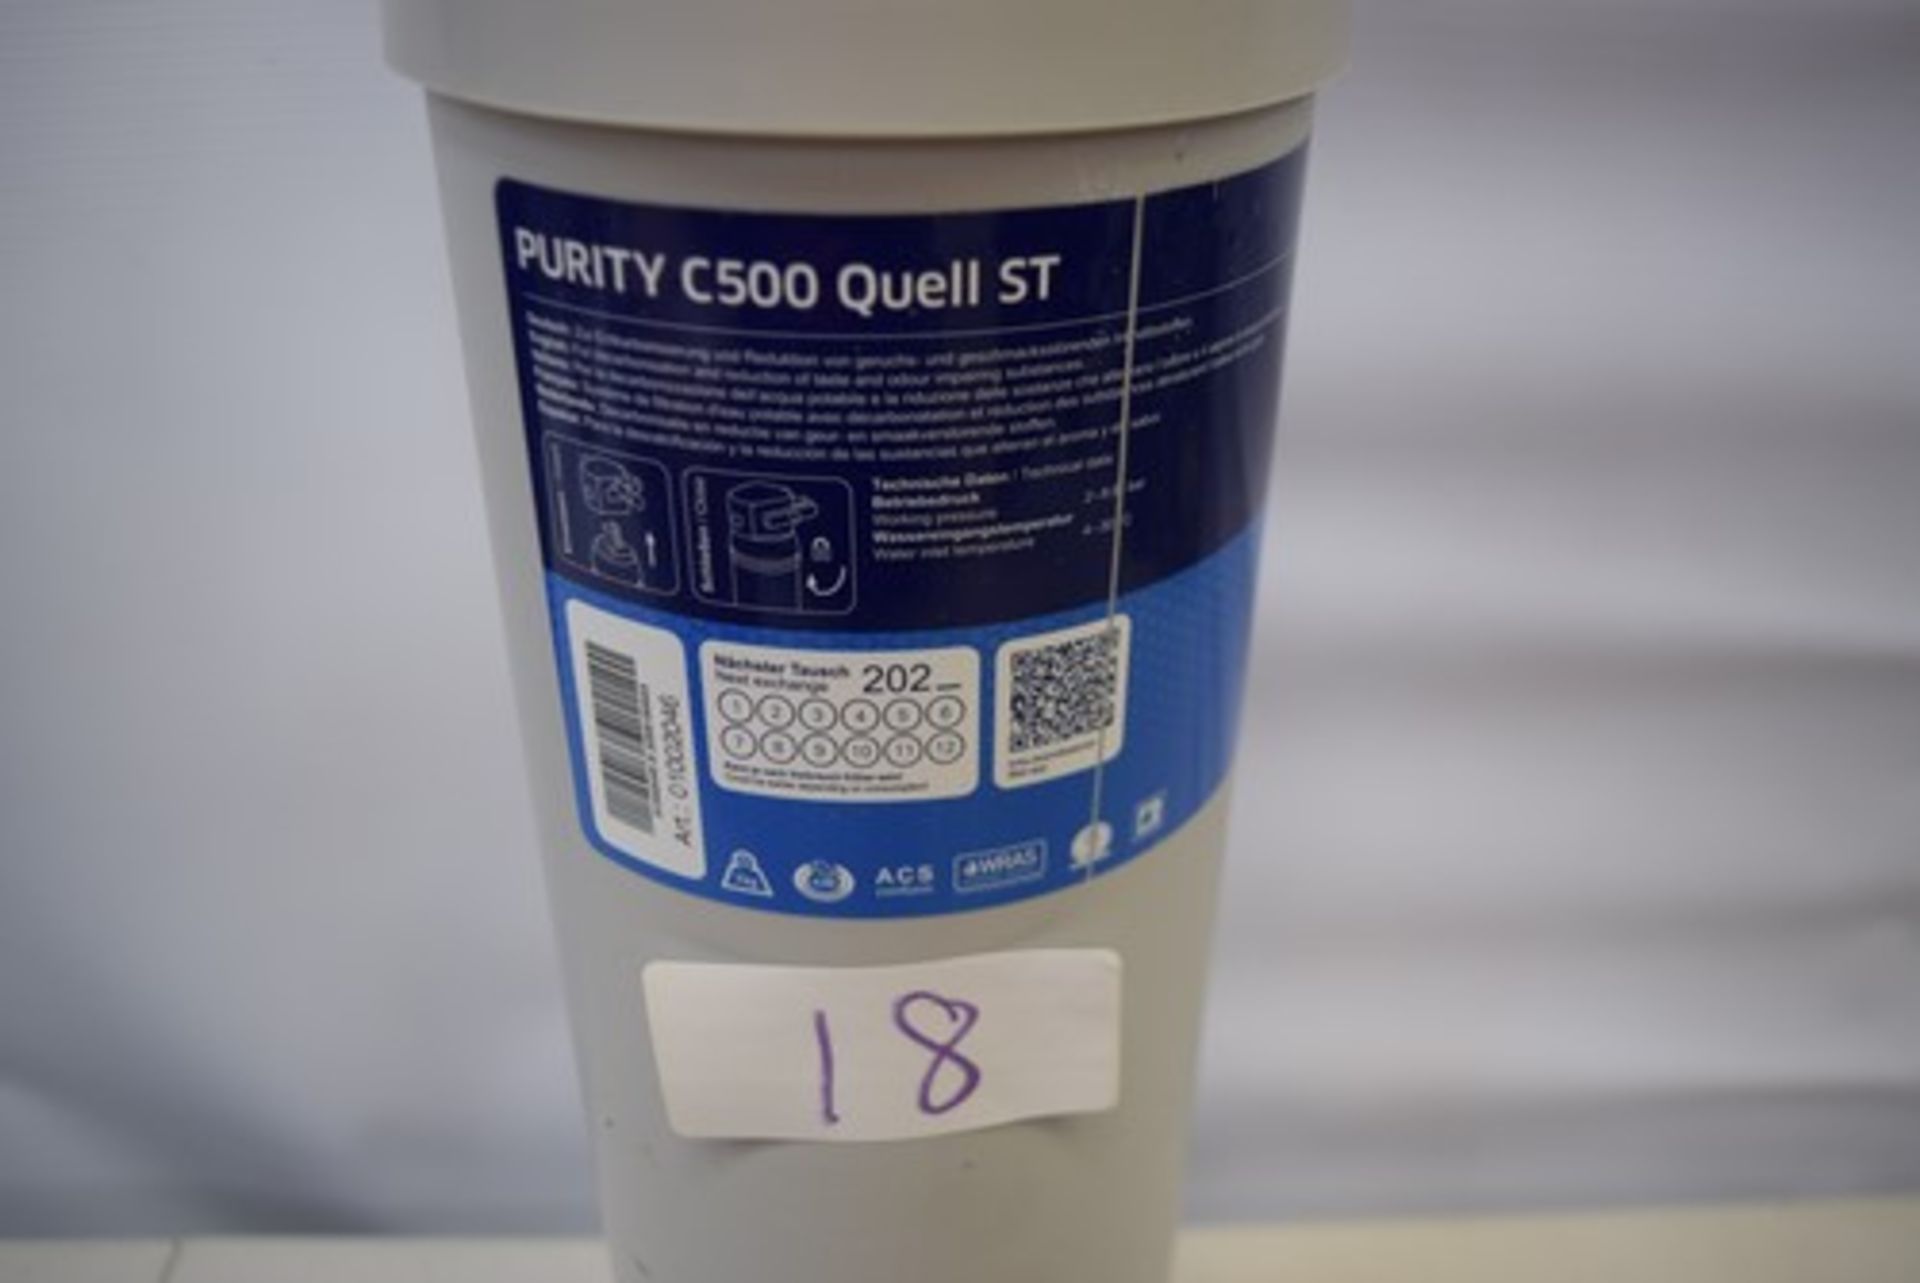 1 x Brita Purity C500 Quell ST water filter, item No: 1002045 - new in box (GS28A) - Image 2 of 3